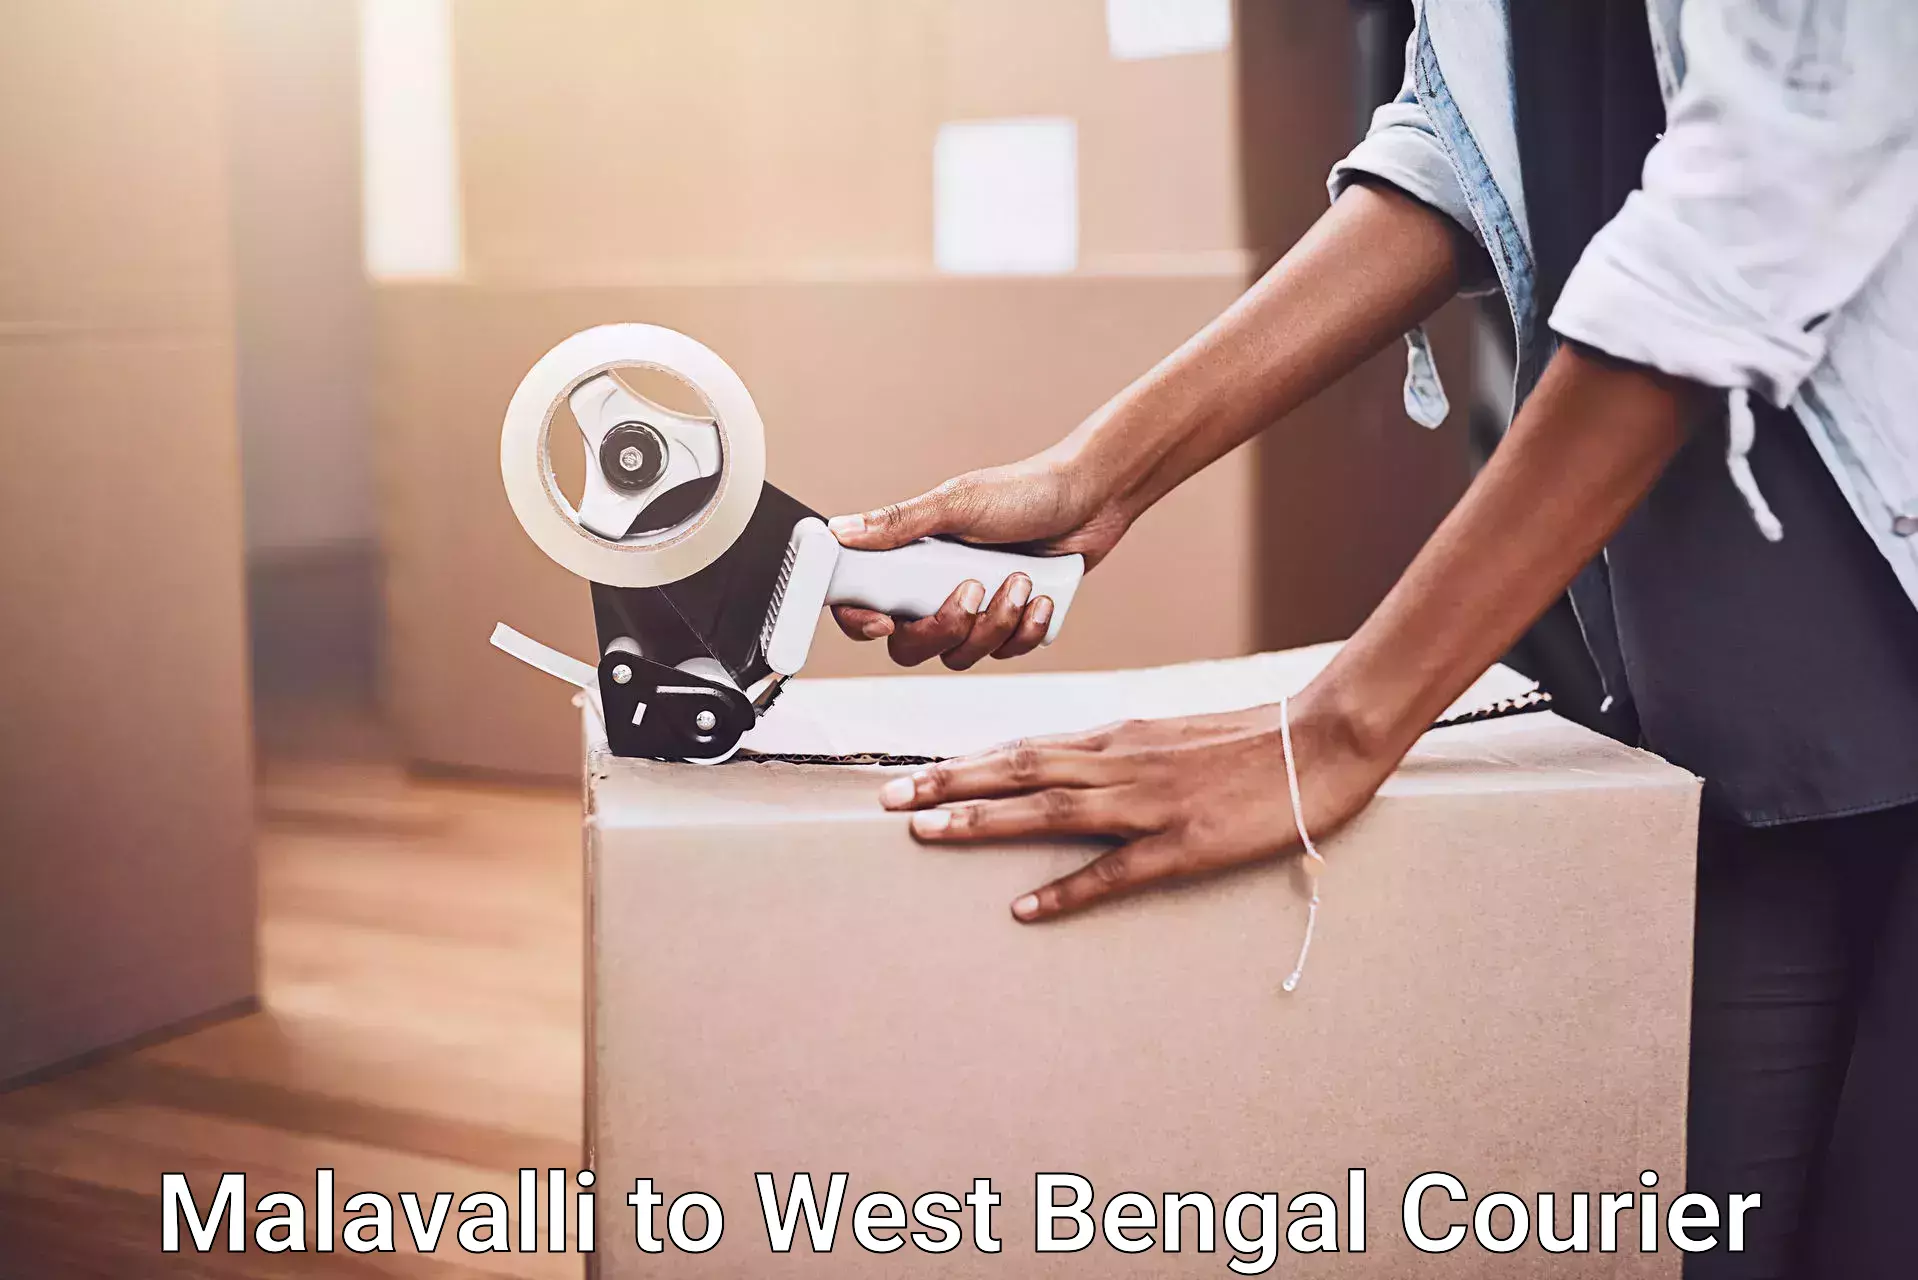 Furniture transport specialists Malavalli to West Bengal